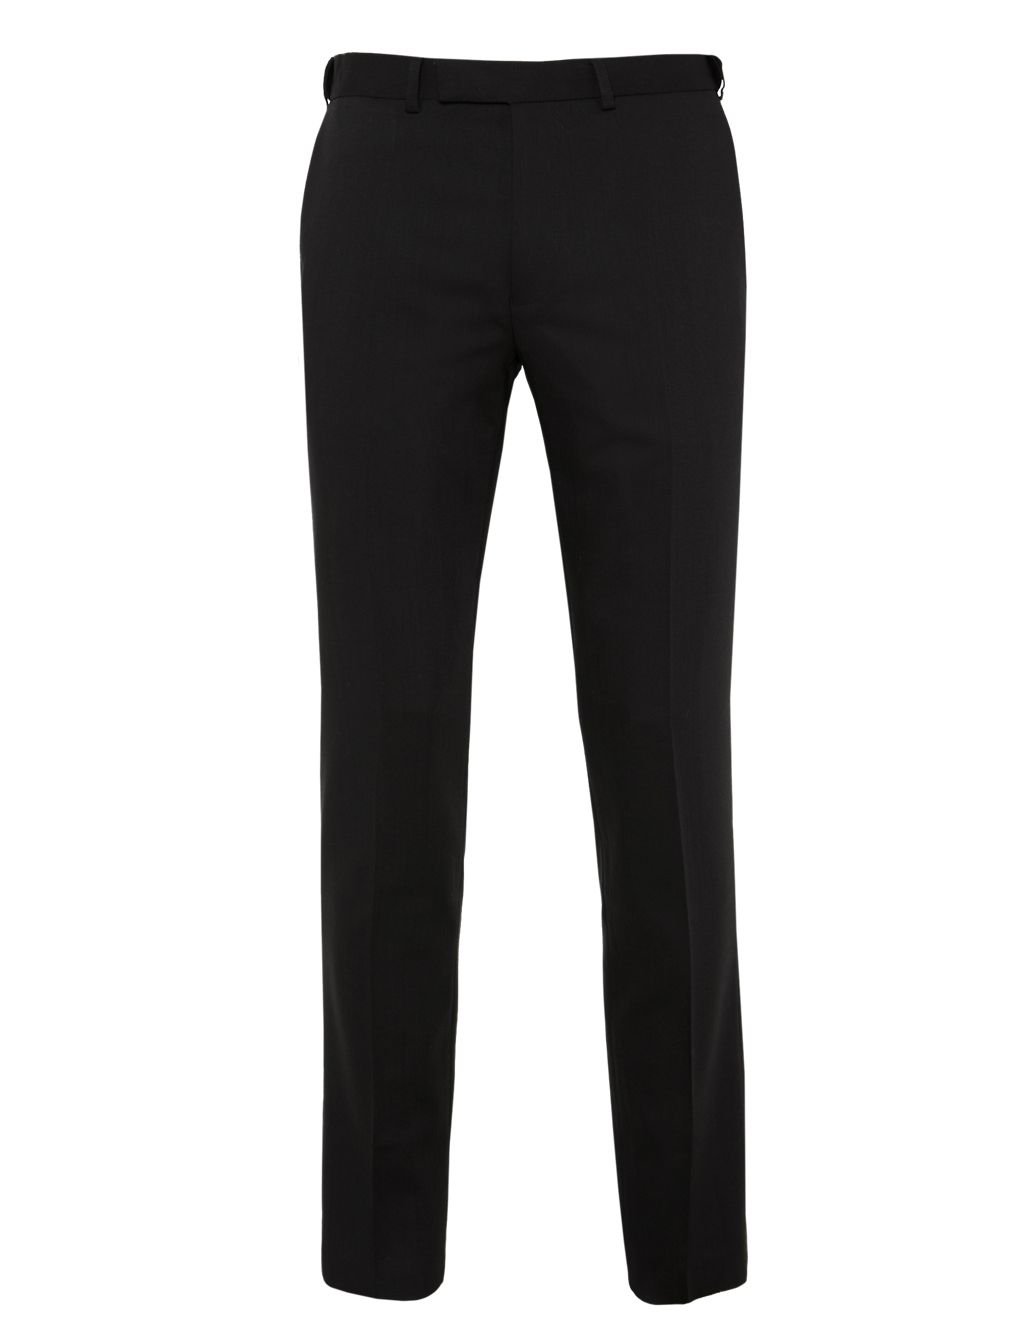 Ultimate Performance Slim Fit Flat Front Trousers with Wool 1 of 7